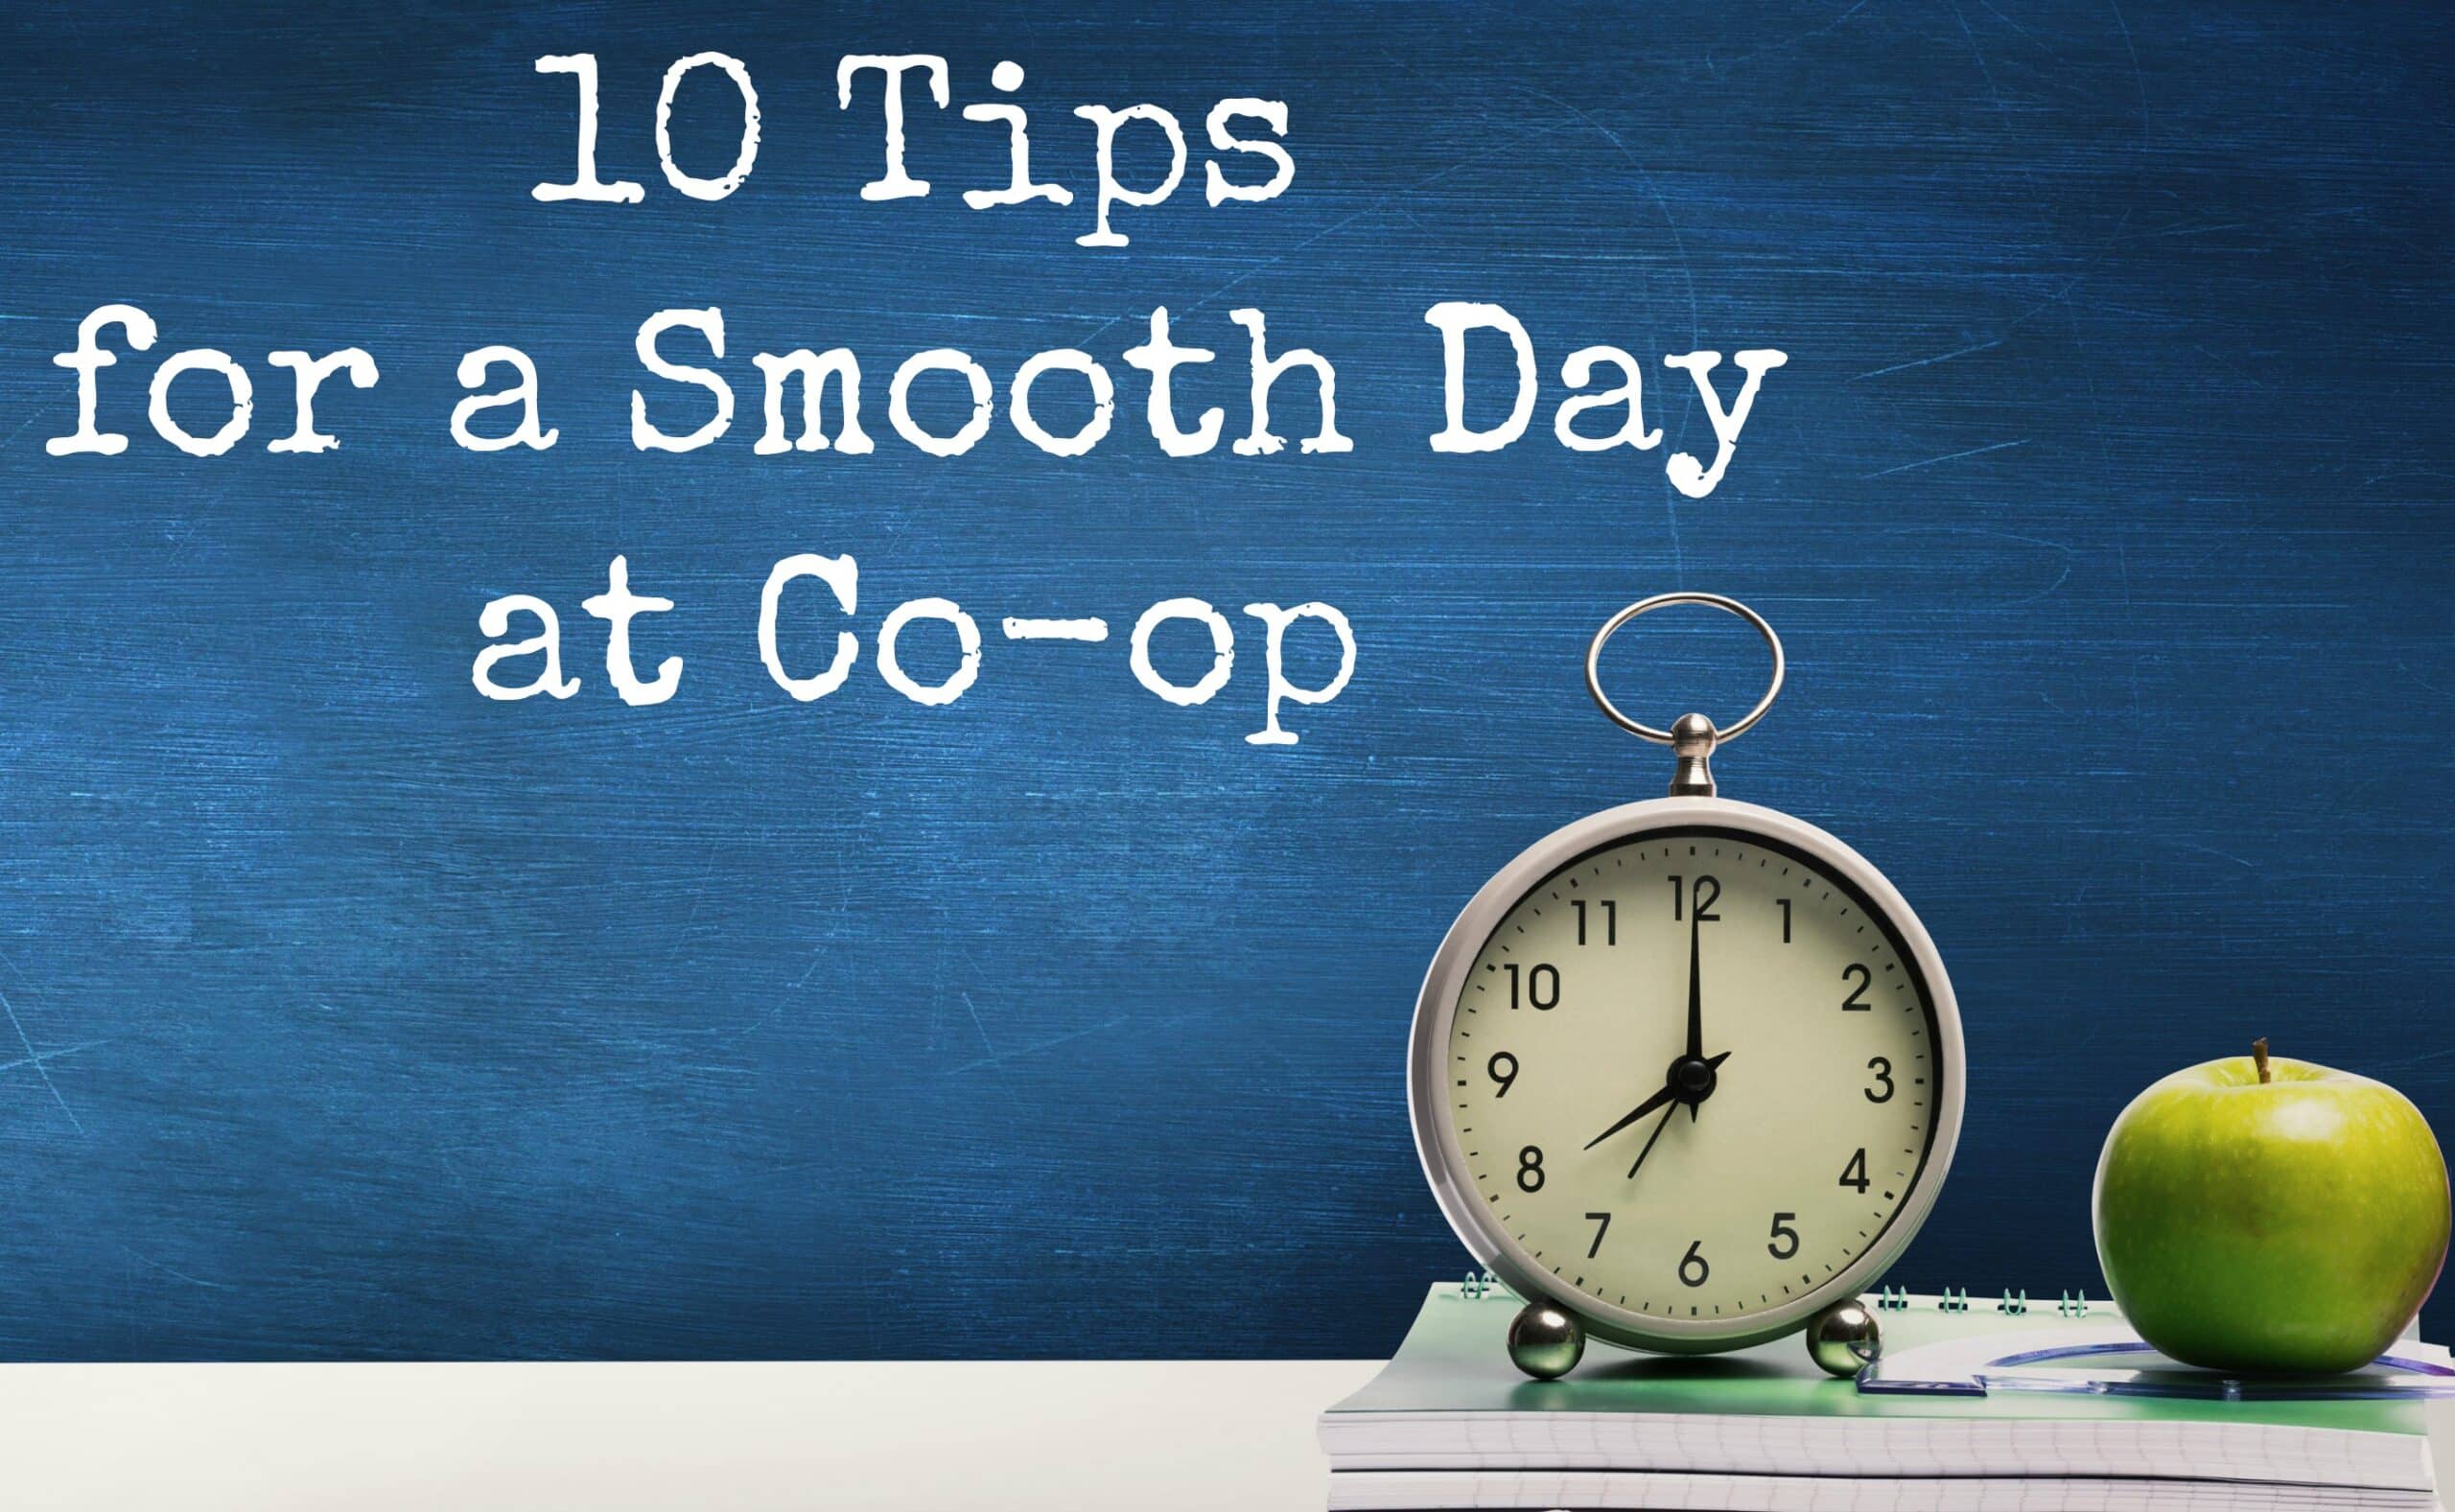 10 Tips for a Smooth Day at Co-op